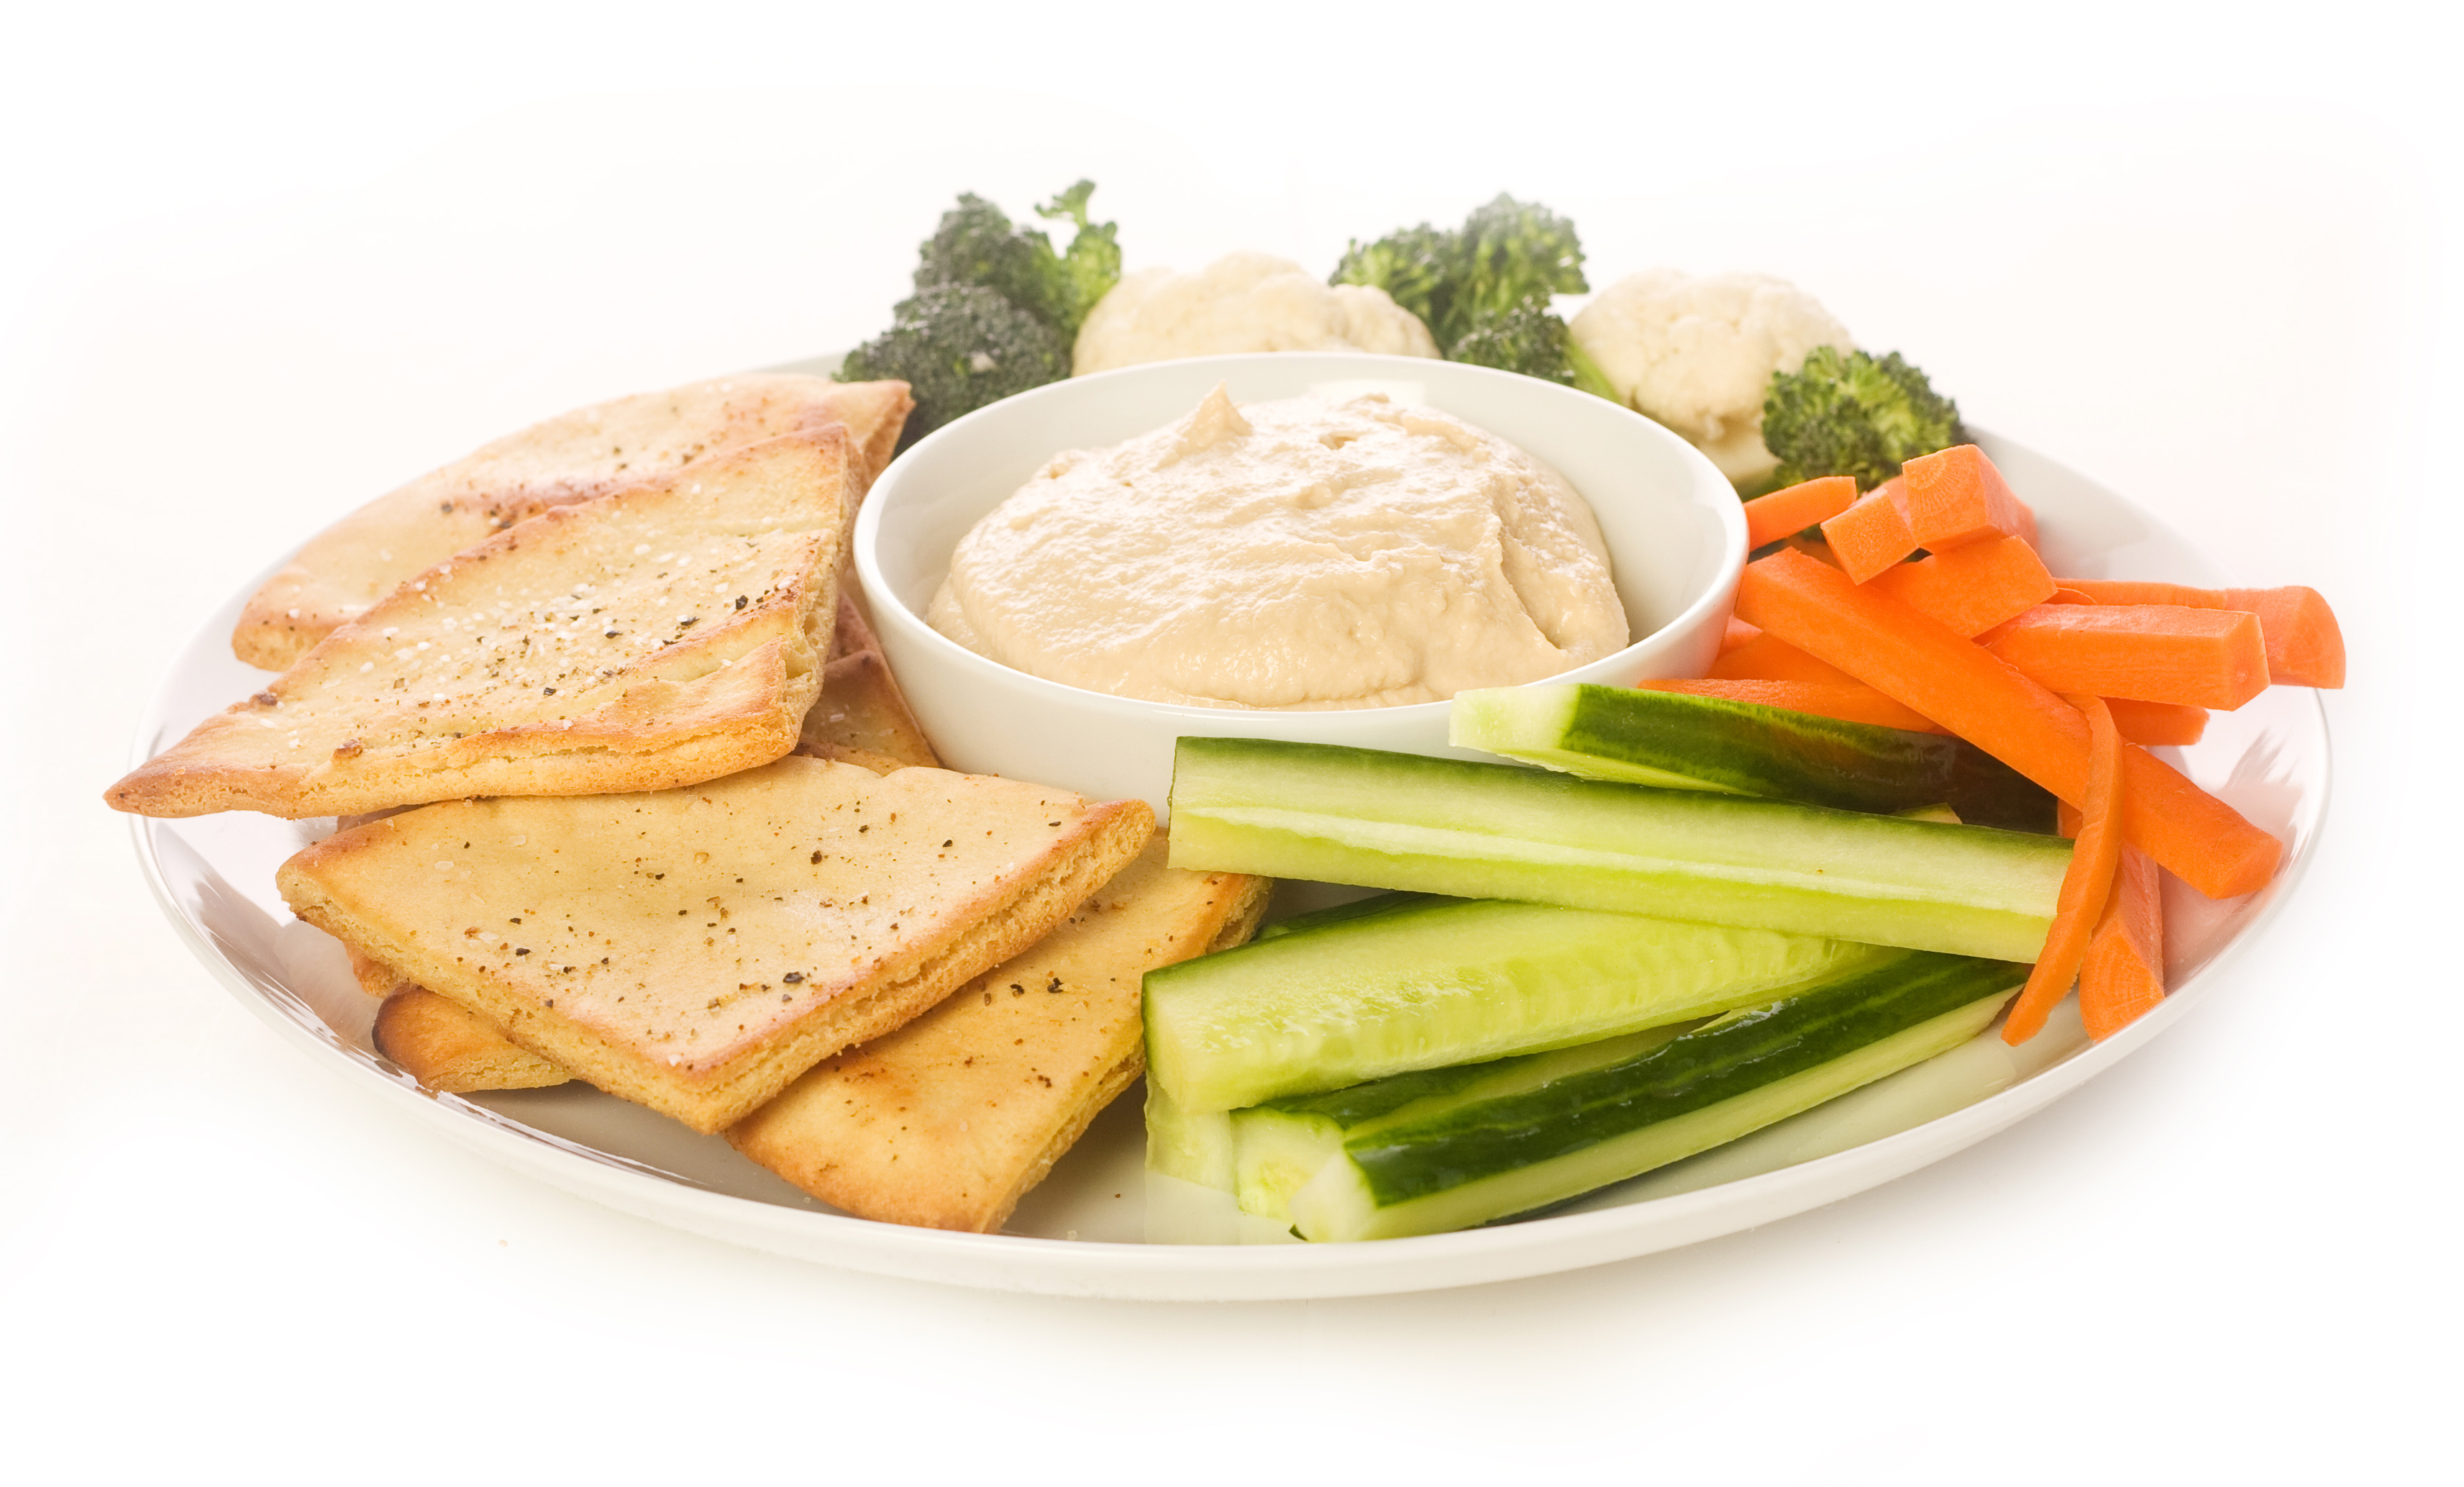 Pita chips and fresh vegetable make a healthy appetizer or snack along with hummus